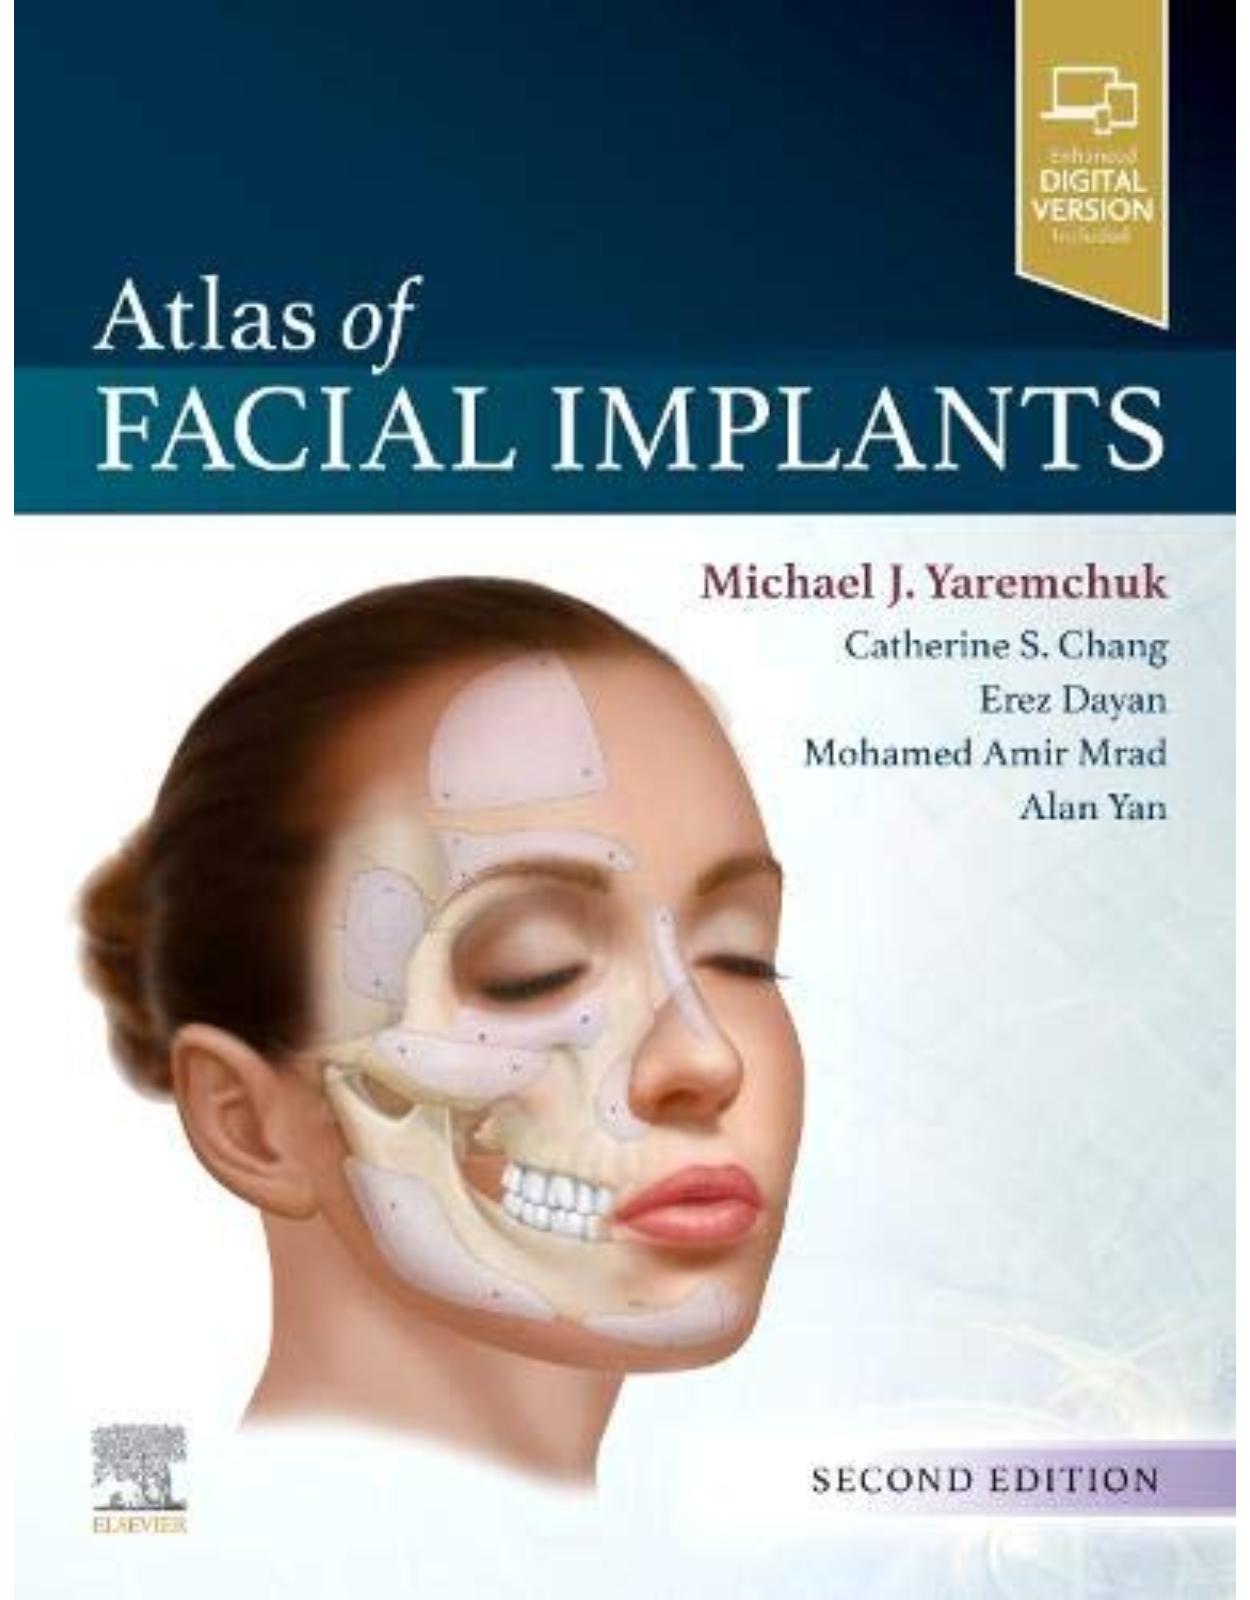 Atlas of Facial Implants, 2nd Edition